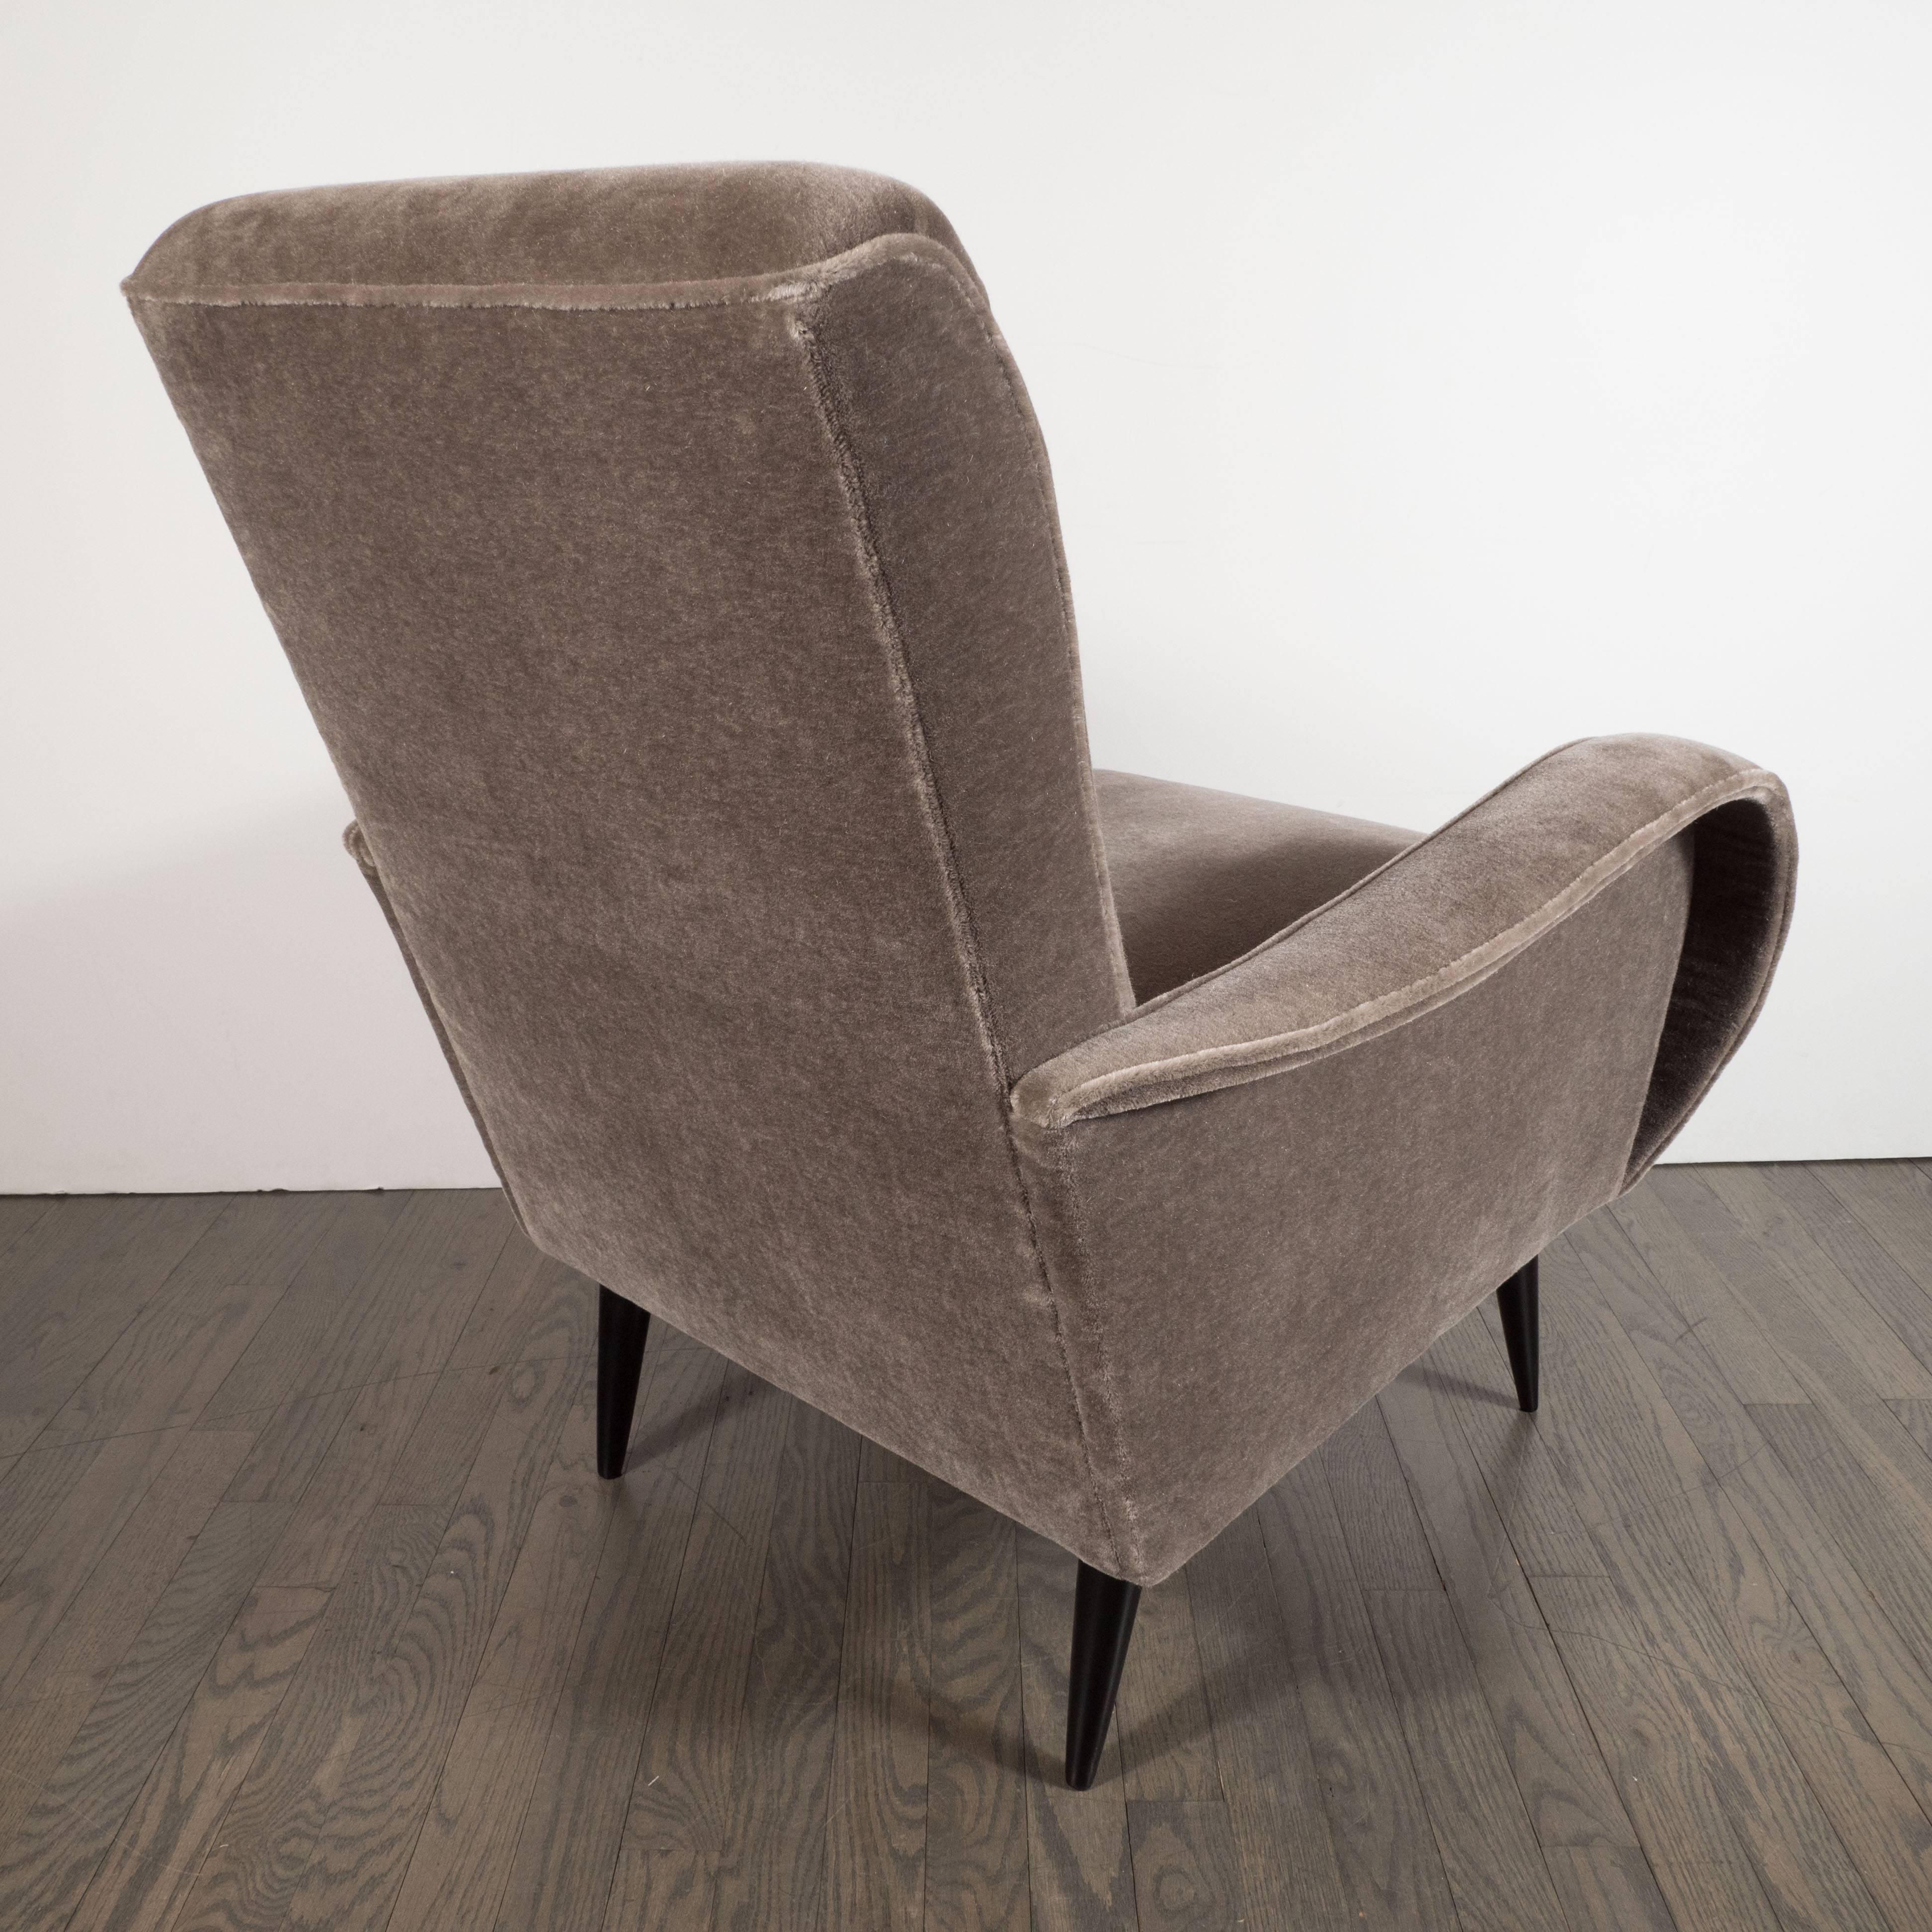 Mid-20th Century Mid-Century Modern Sculptural Lounge Chairs in Smoked Platinum Mohair 